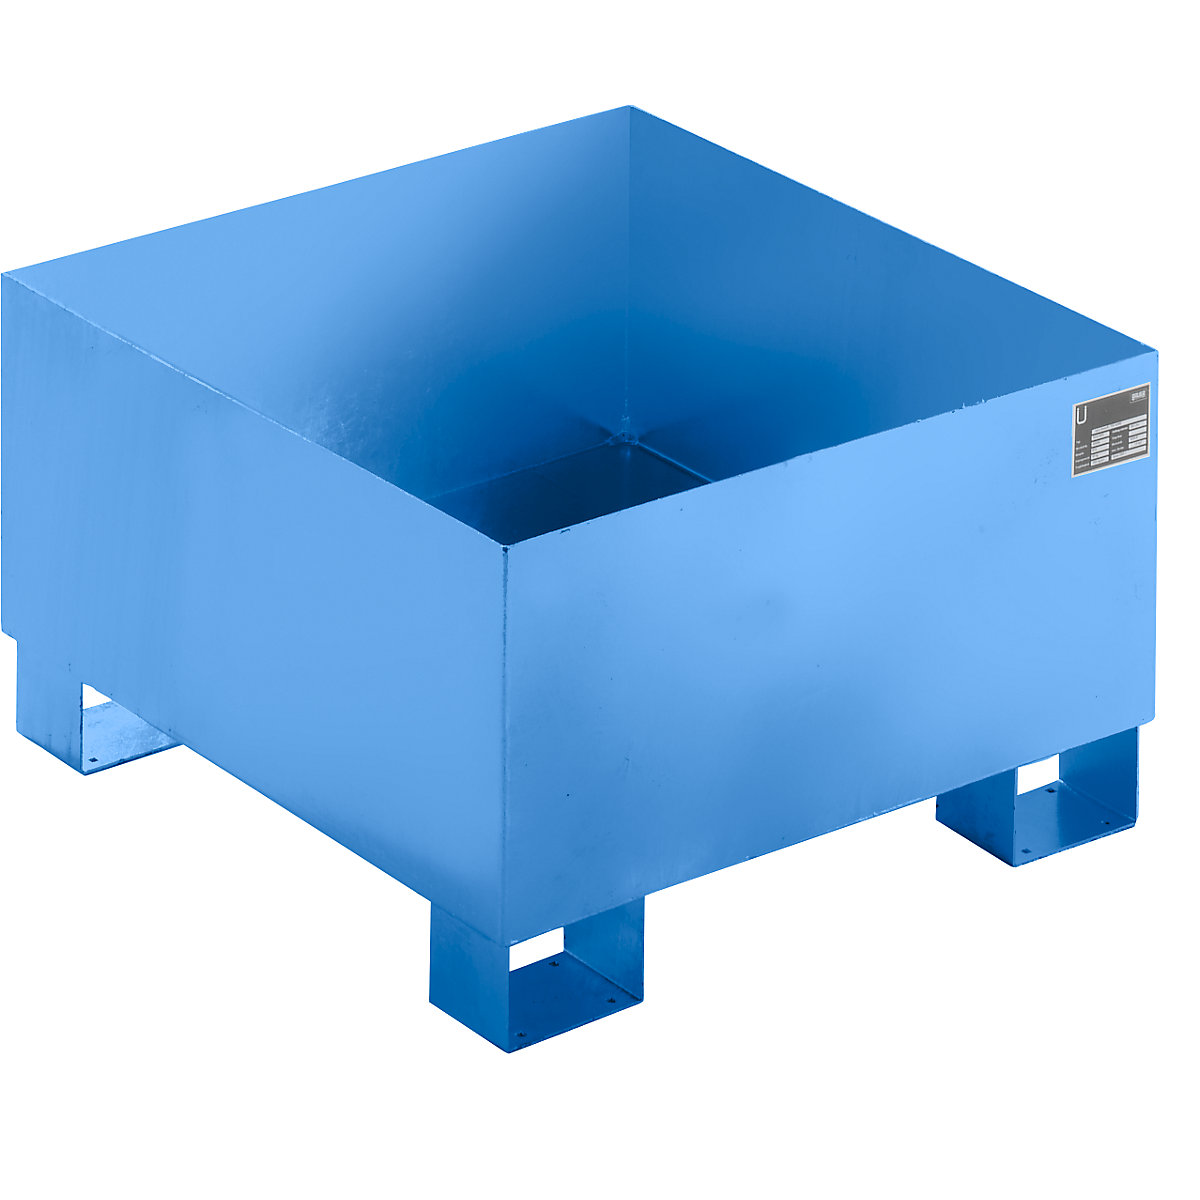 EUROKRAFTbasic – Sump tray made from sheet steel, LxWxH 800 x 800 x 465 mm, blue RAL 5012